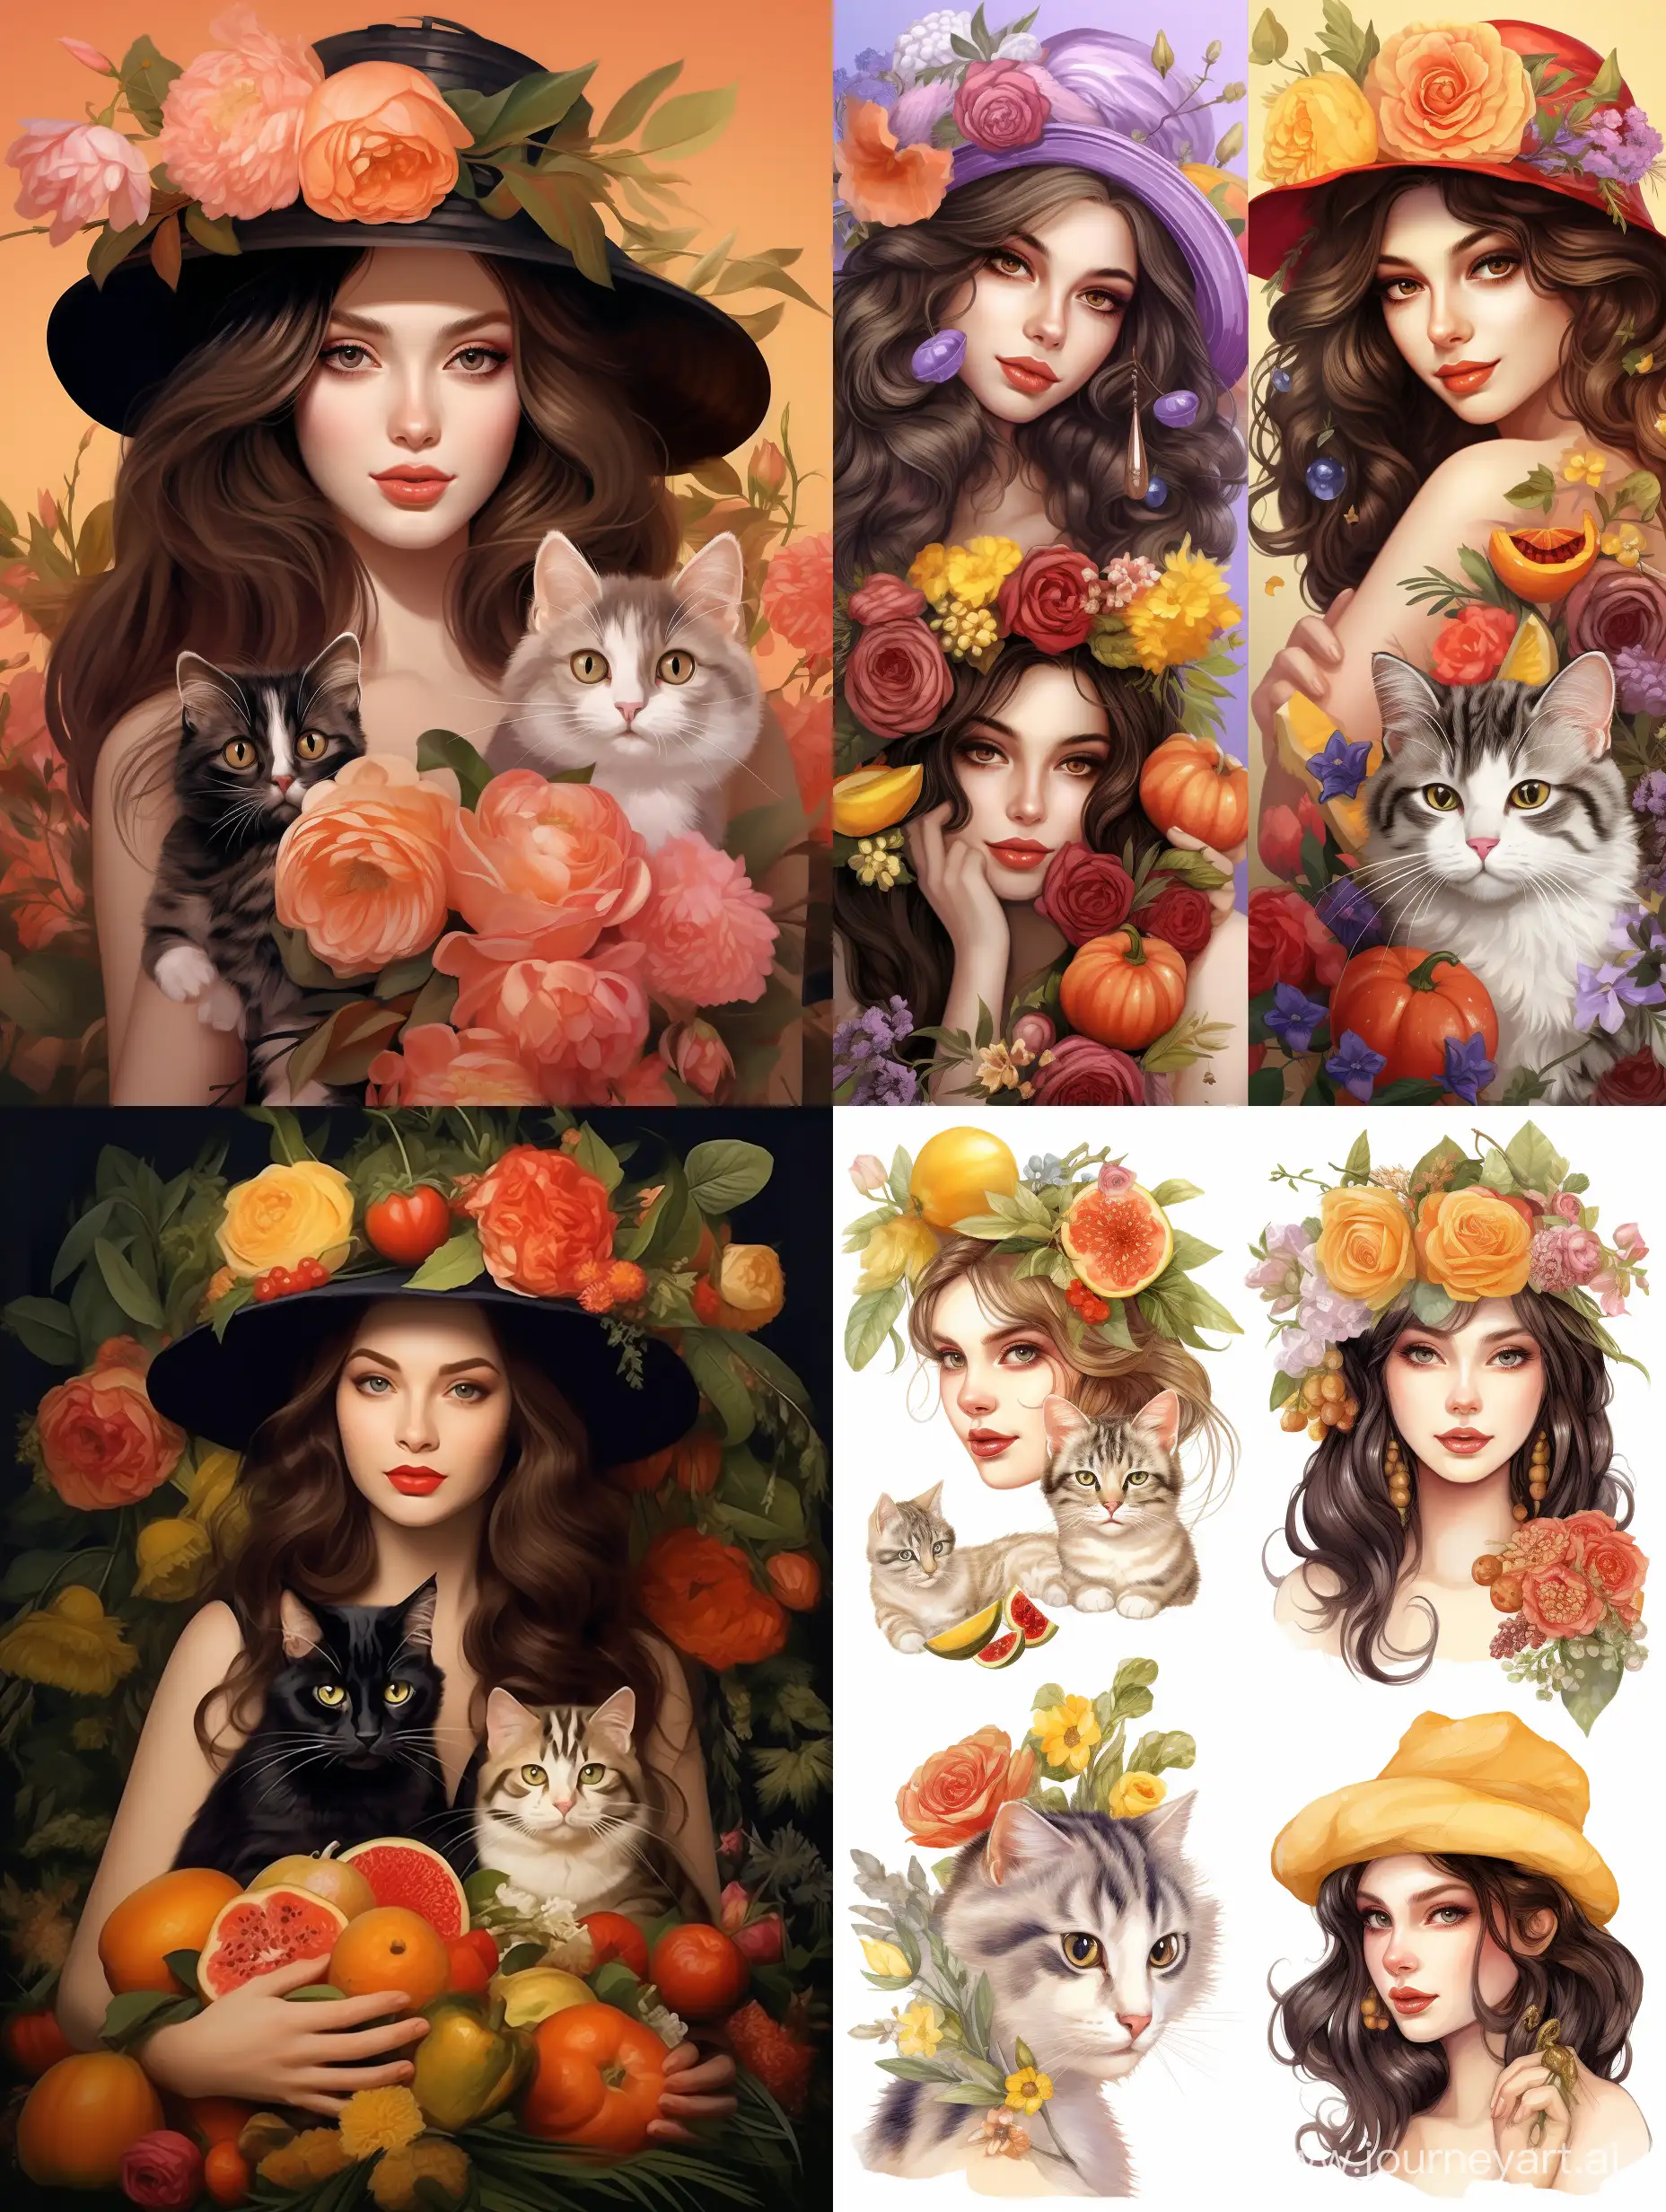 Beautiful-Brunette-with-Fruits-and-Flowers-Adorned-in-a-Hat-with-Cat-and-Dog